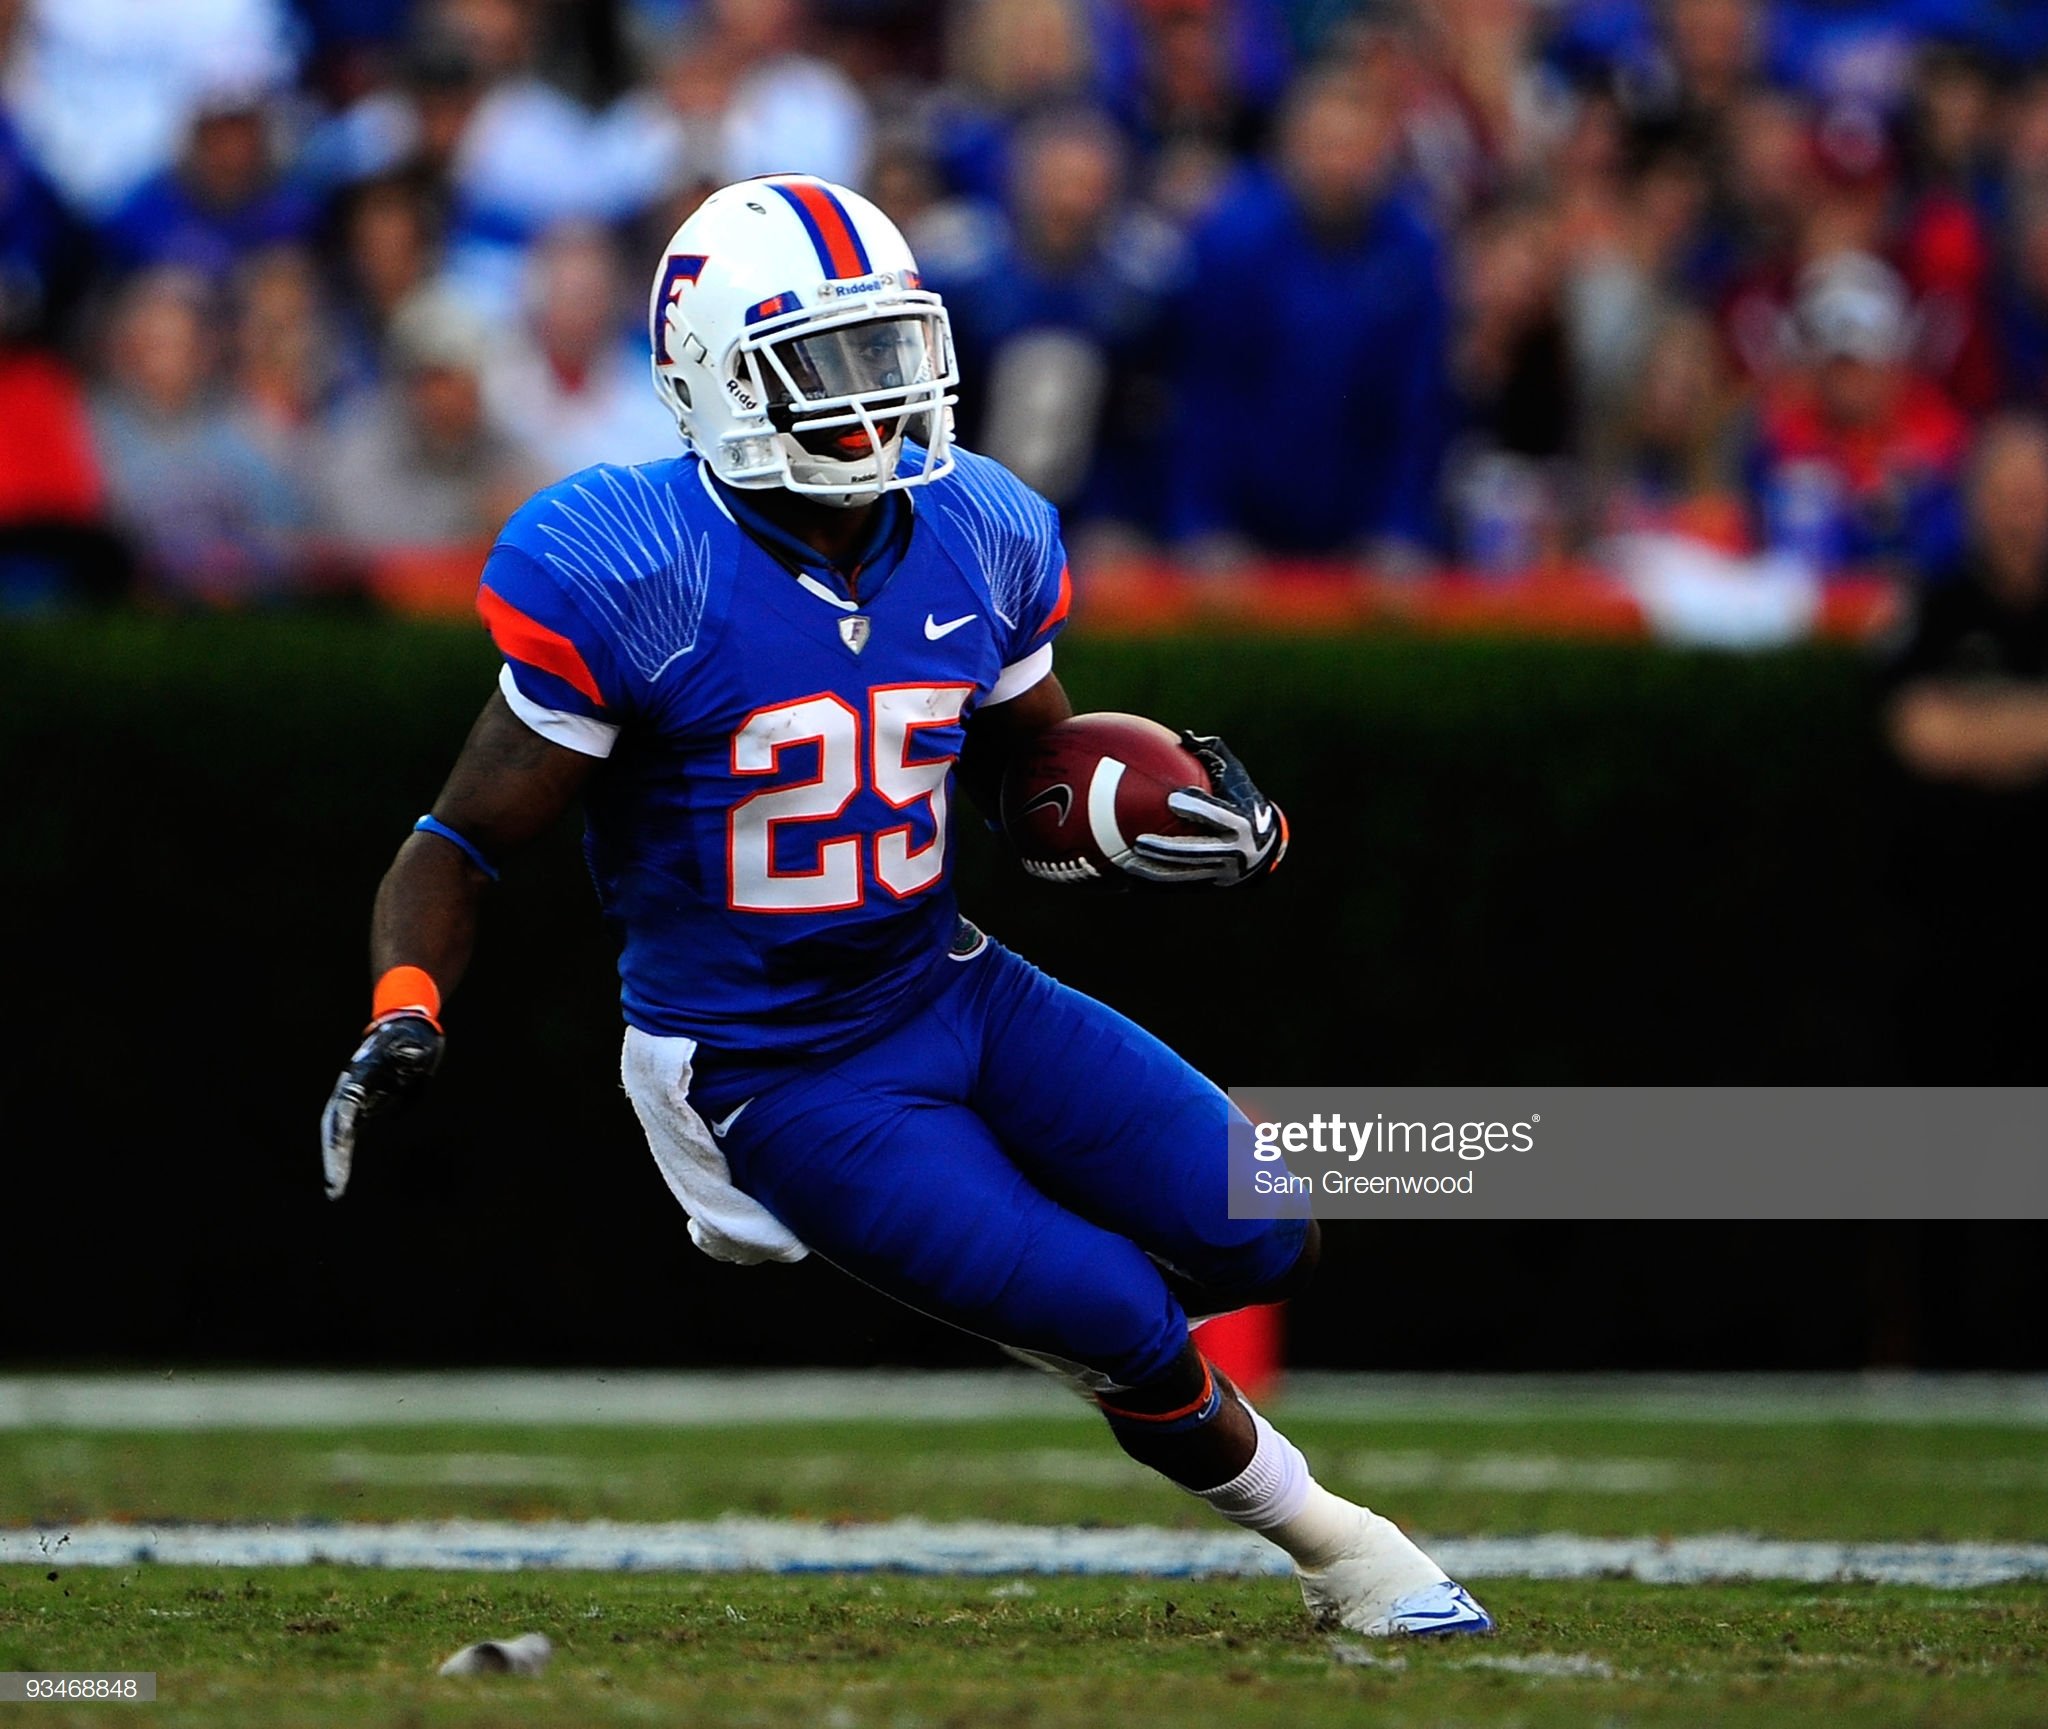 Gators Uniform Tracker on X: Then, in Tebow's final game in The Swamp,  Florida debuted new look white helmets for the 2009 Nike Pro Combat uniforms.  “Nike designers immersed themselves in Gators